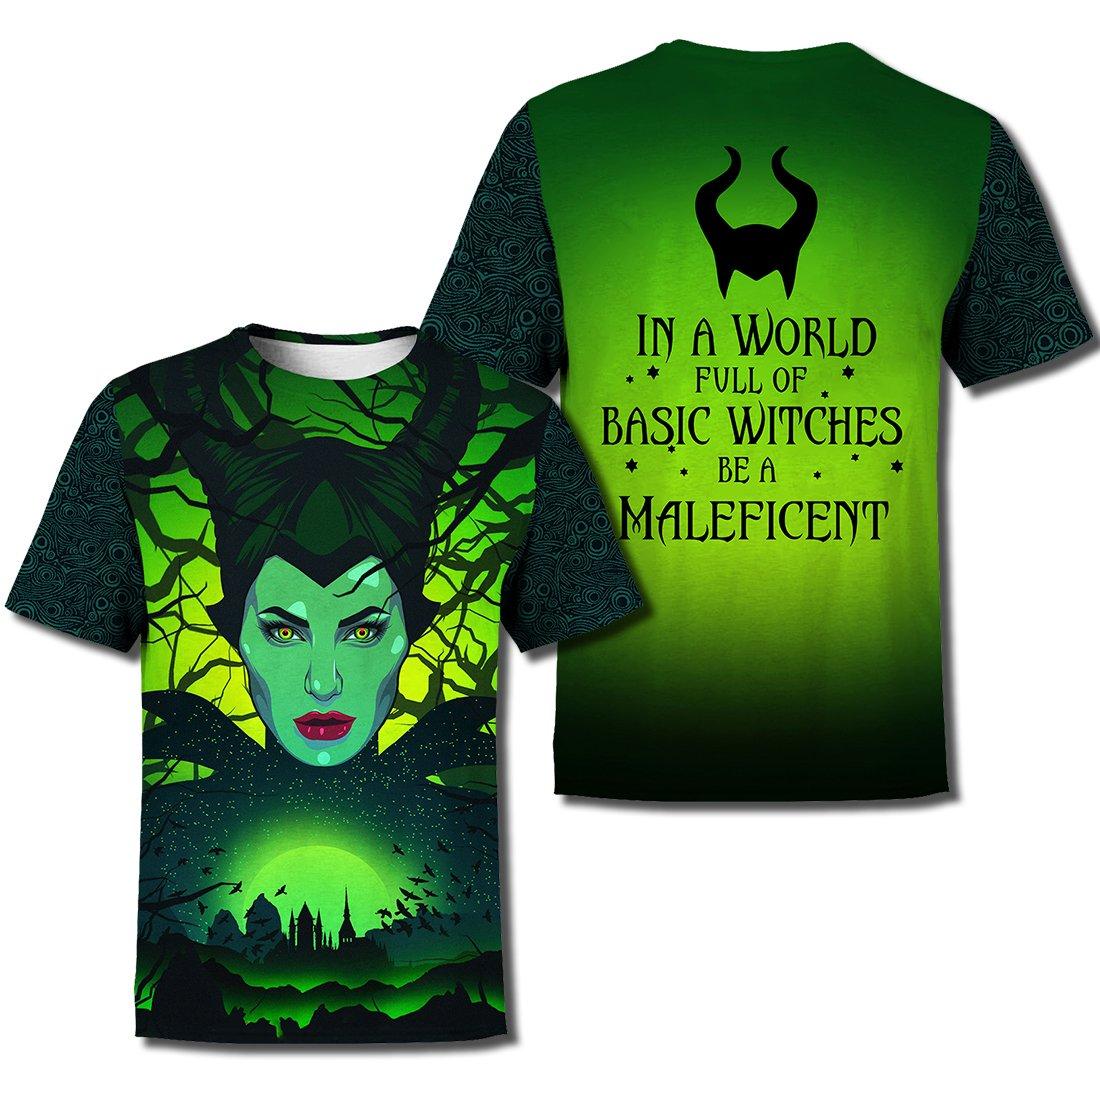 In a world full of basic witches be a maleficent 3d t-shirt